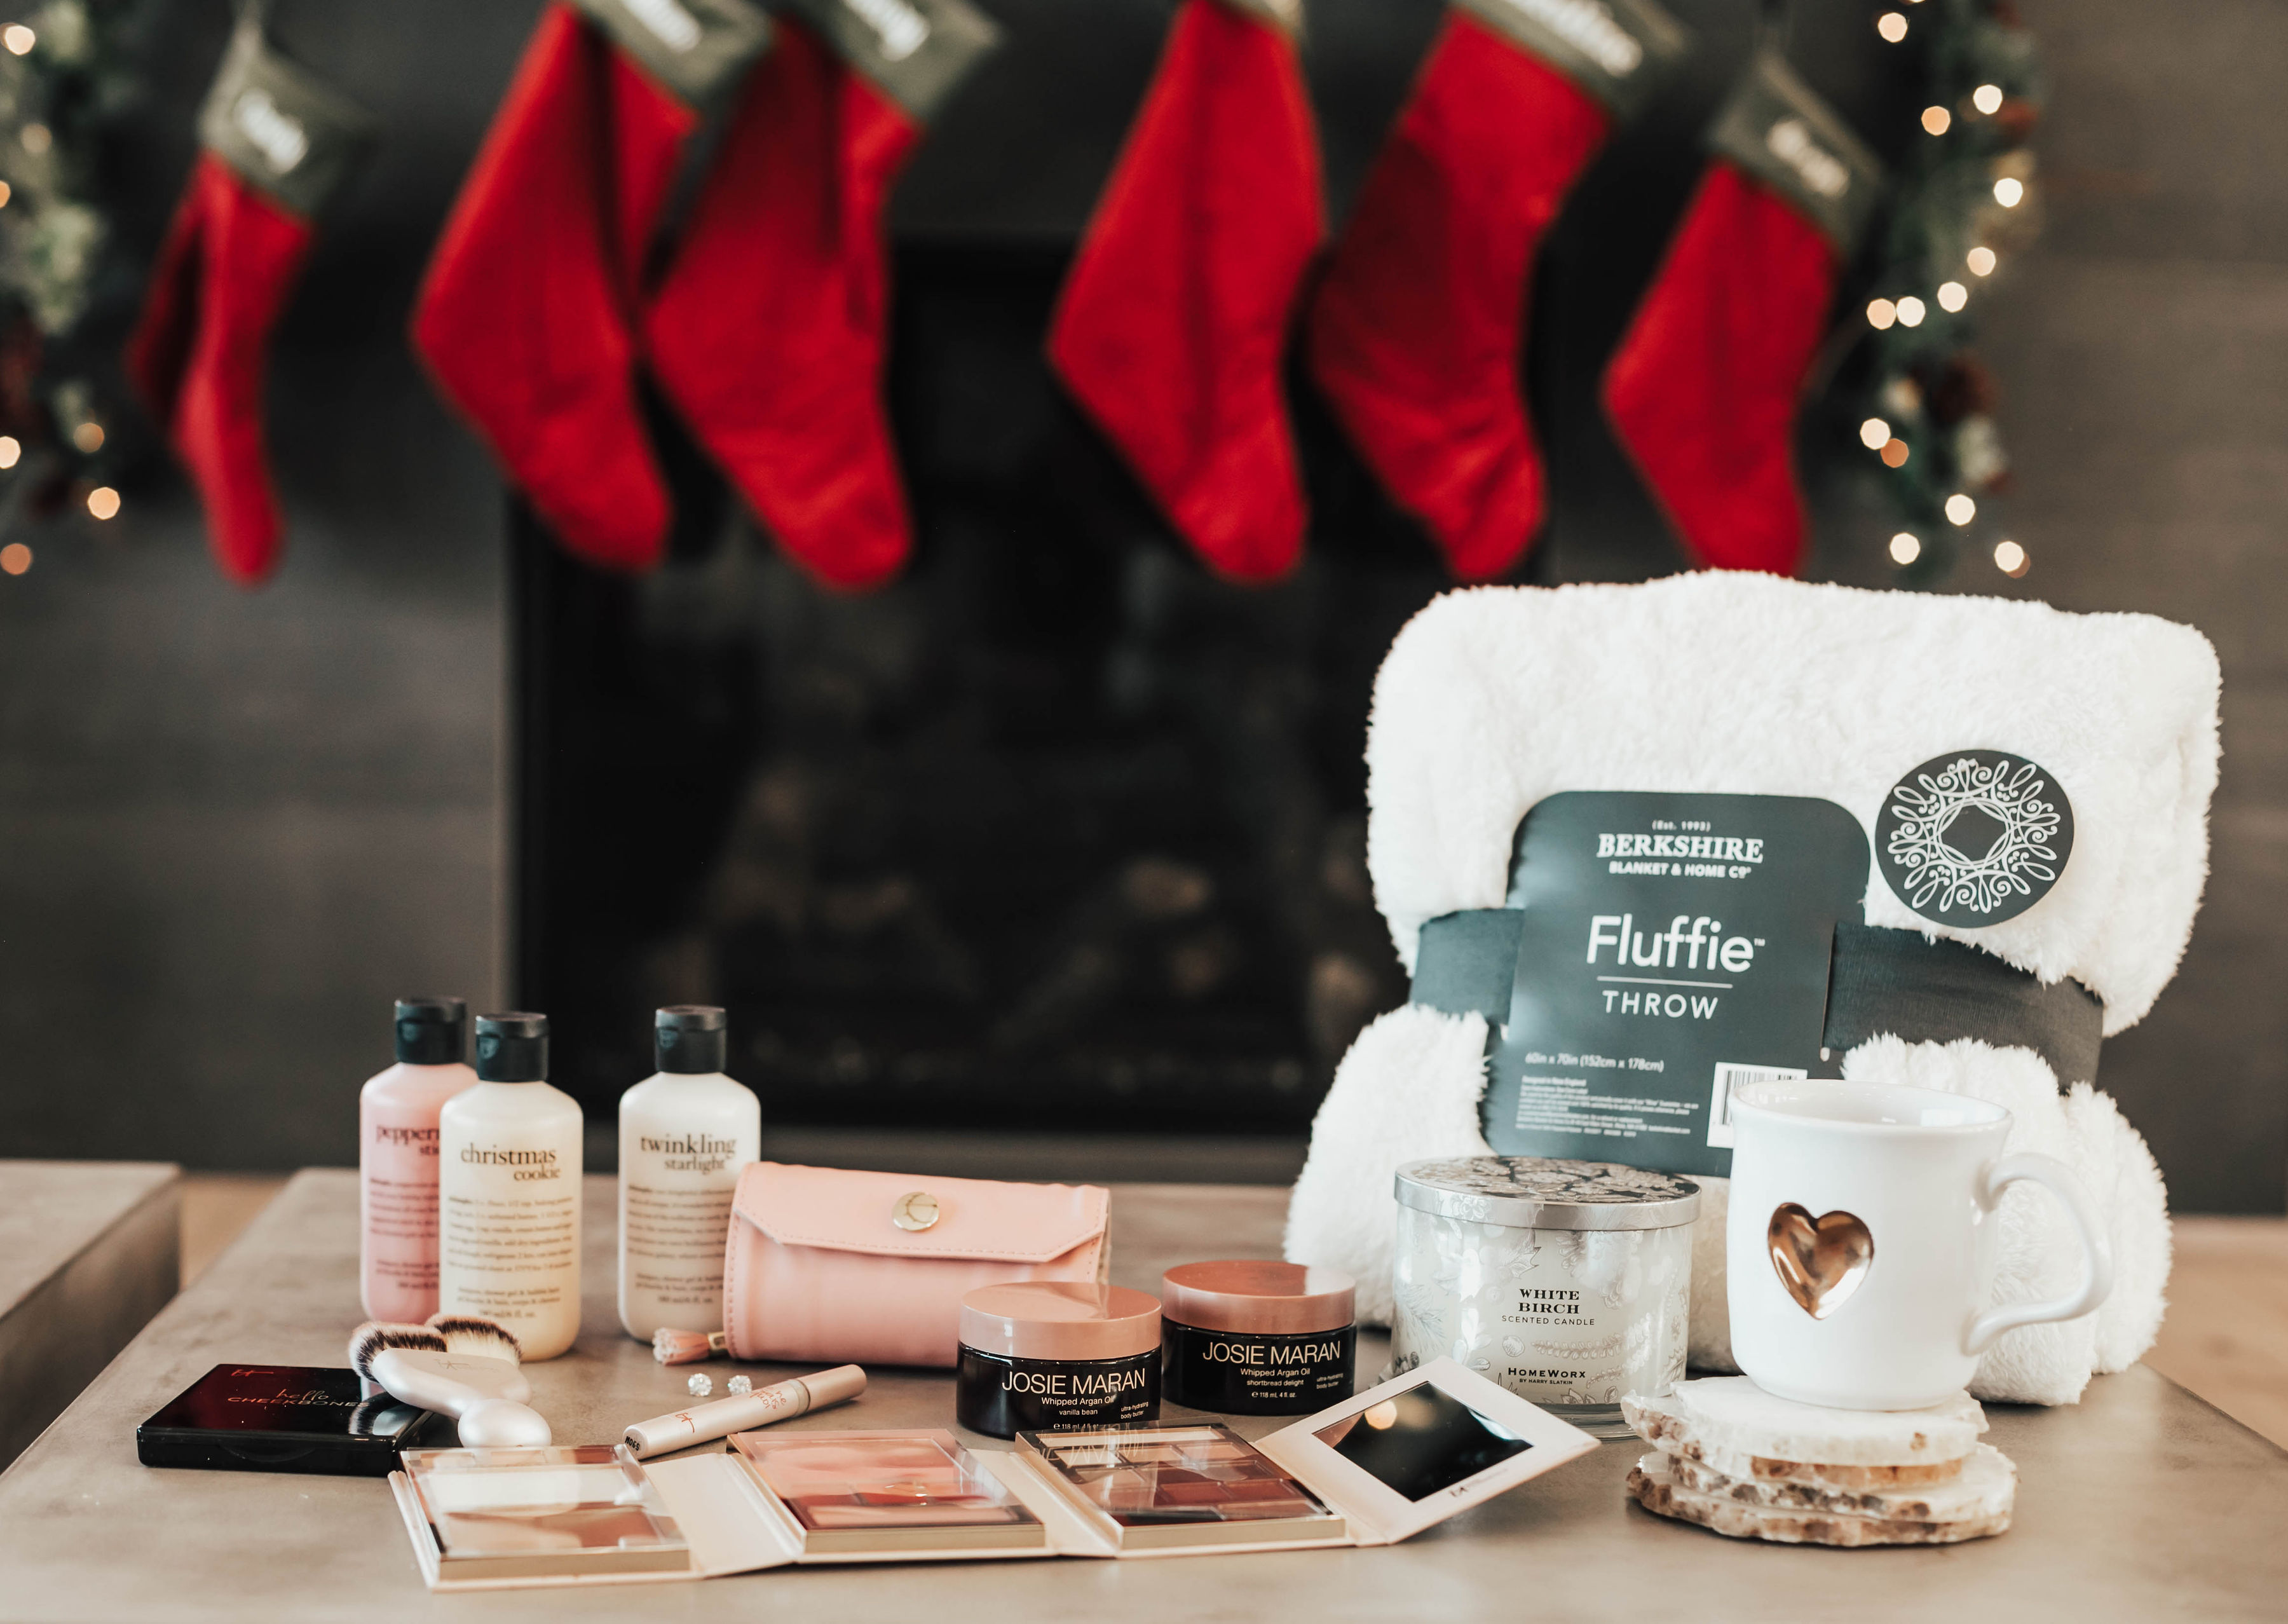 Emily Farren Wieczorek of Two Peas in a Prada shares all of her favorite gifts for the holidays from one of her favorite retailers in her QVC Gift Guide !!!